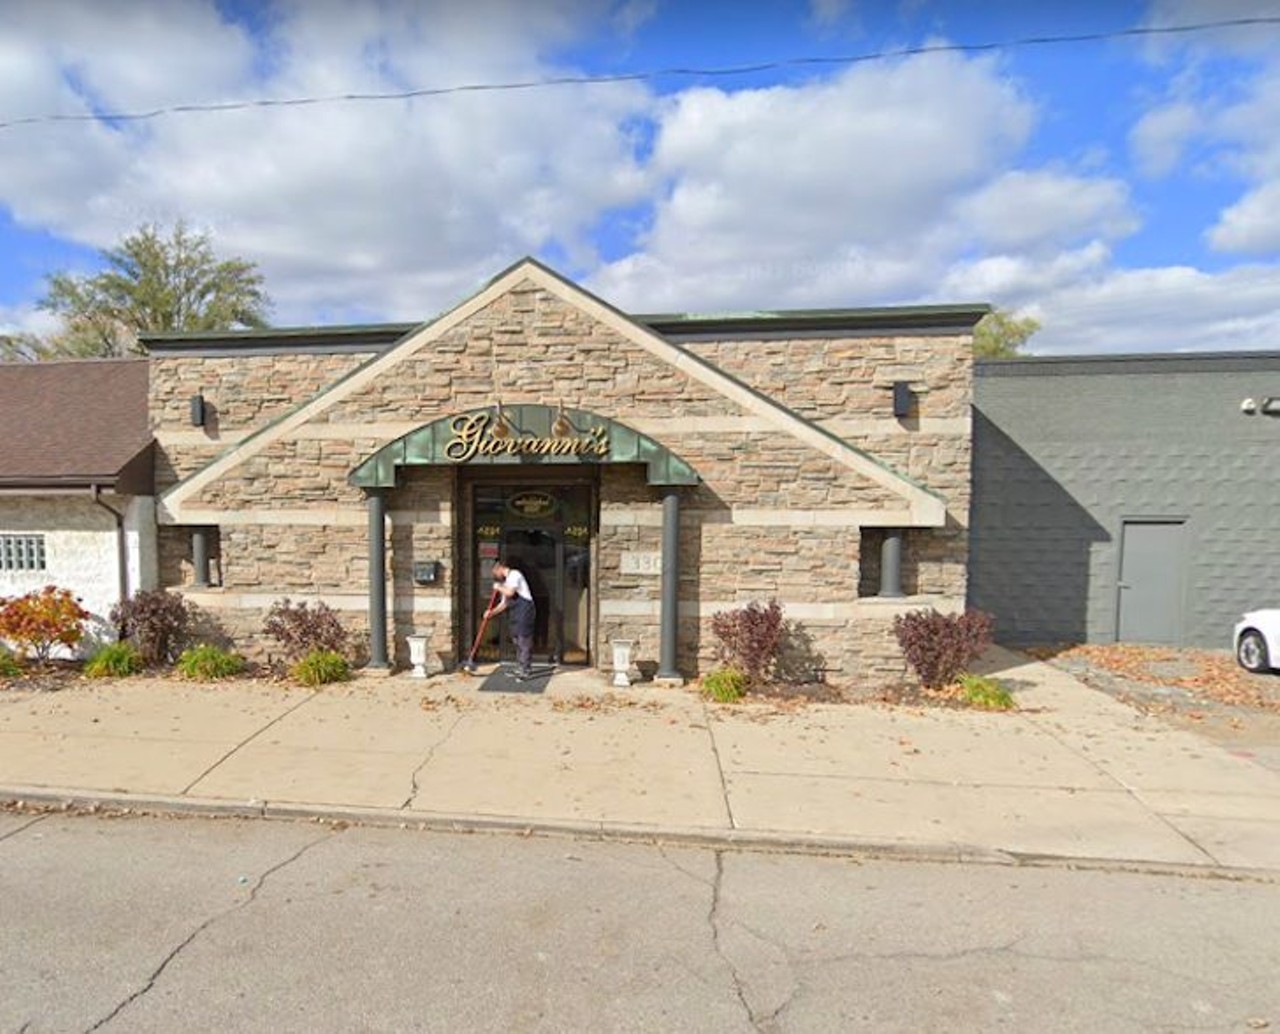 2. Giovanni's Ristorante
330 S. Oakwood St., Detroit; 313-841-0122
??
&#147;This place is an awesome well kept secret. Giovanni's is an amazing Italian restaurant. The service and food are top notch and the atmosphere is very romantic.&#148; - Antoine M.
Photo via Google Maps